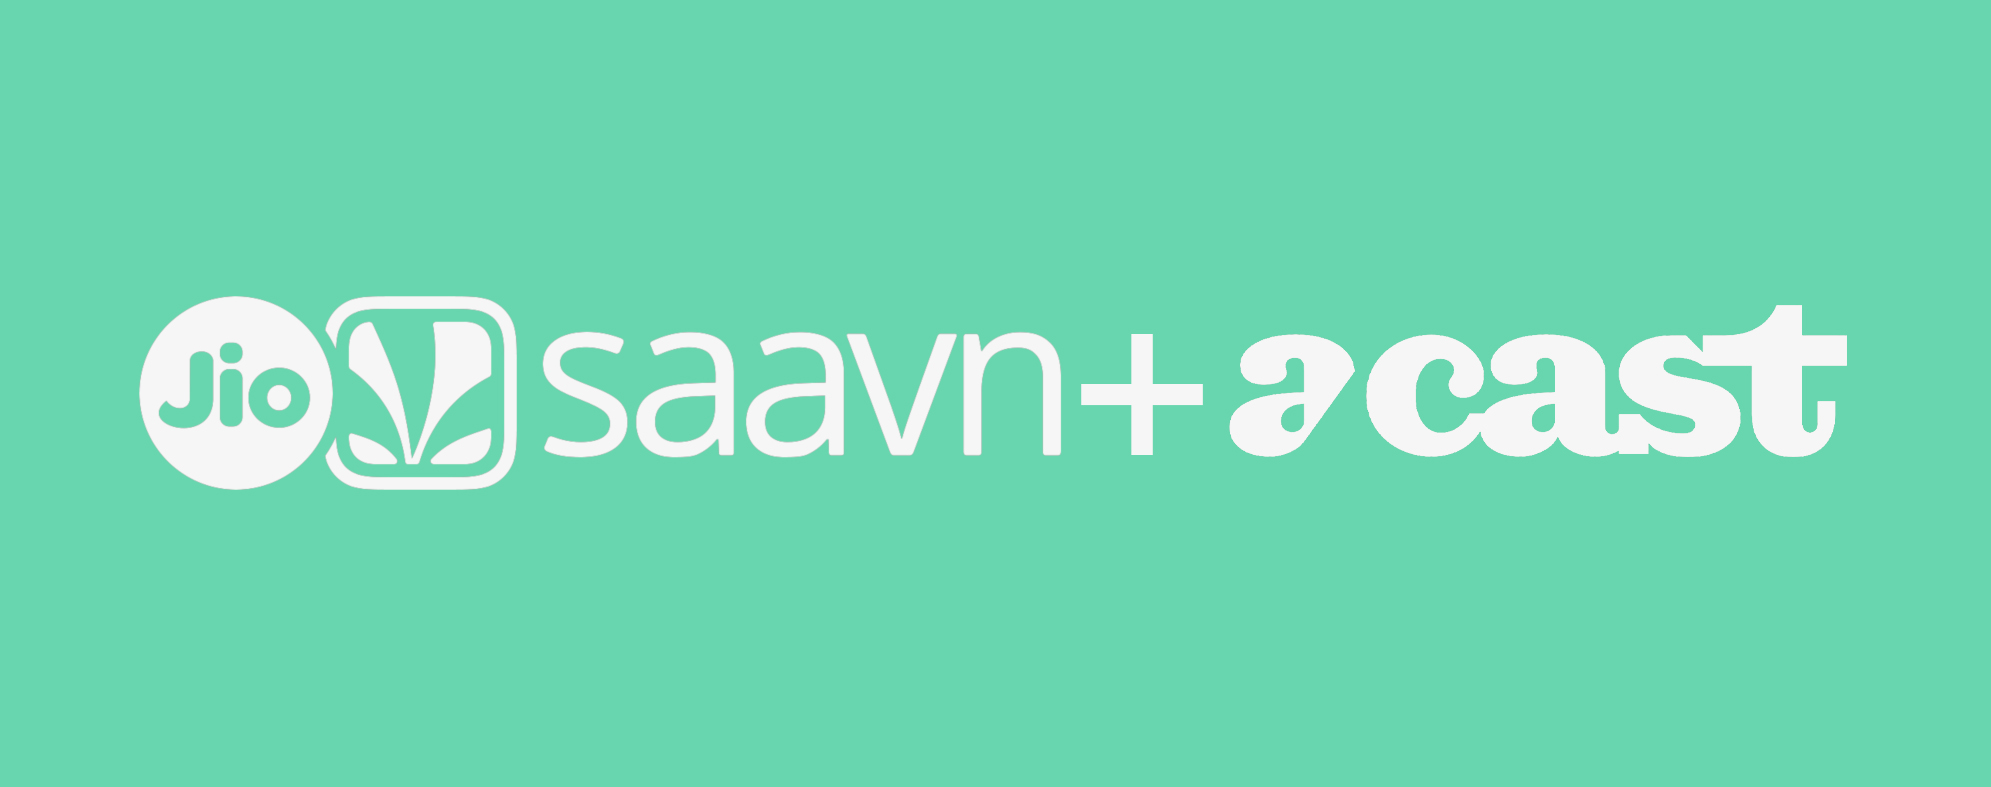 Acast partners with JioSaavn to bring podcasts to the streaming platform